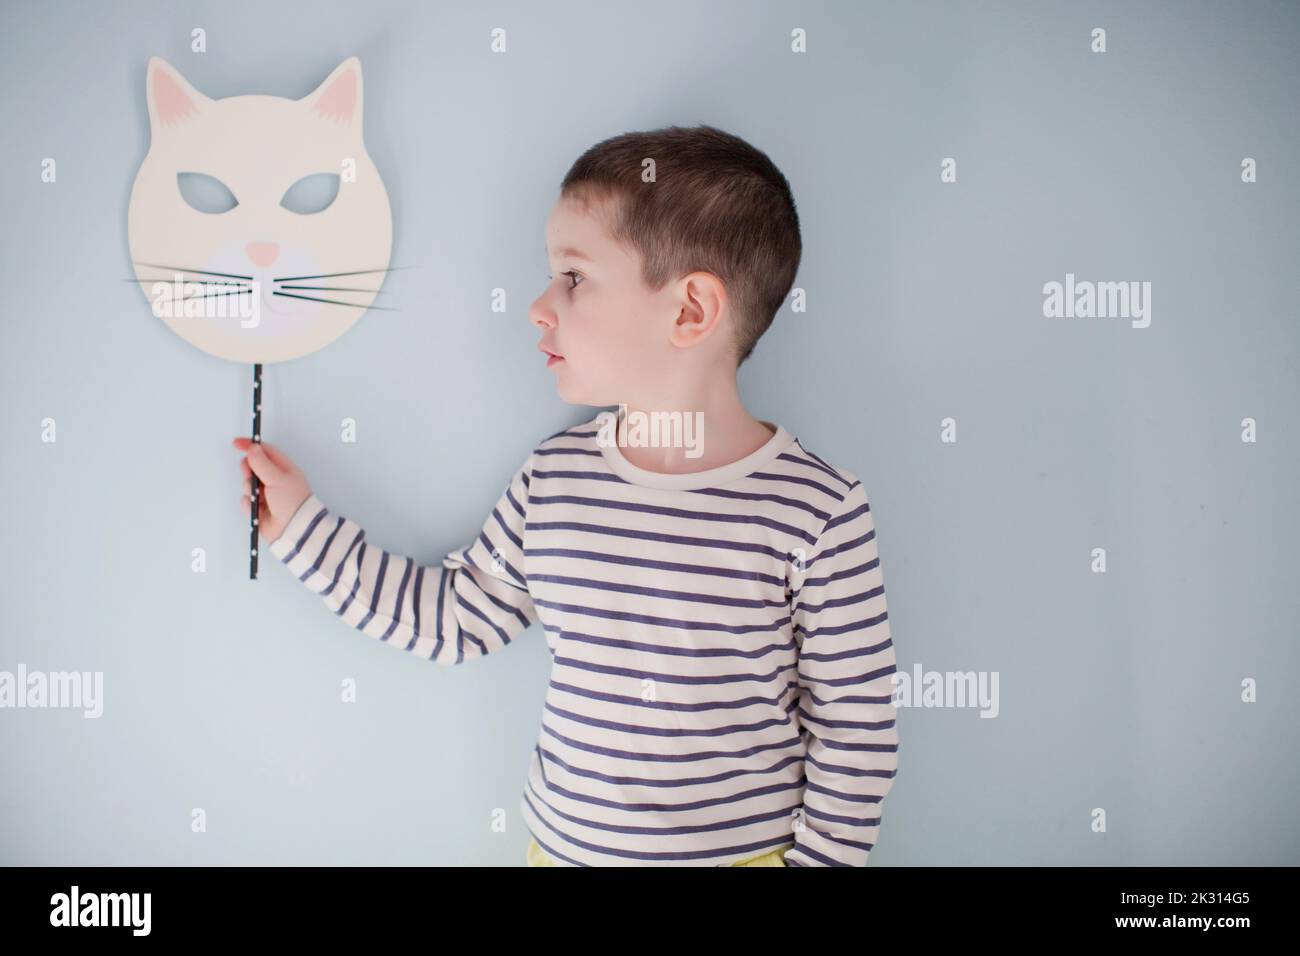 Boy standing with Halloween mask in front of gray wall Stock Photo